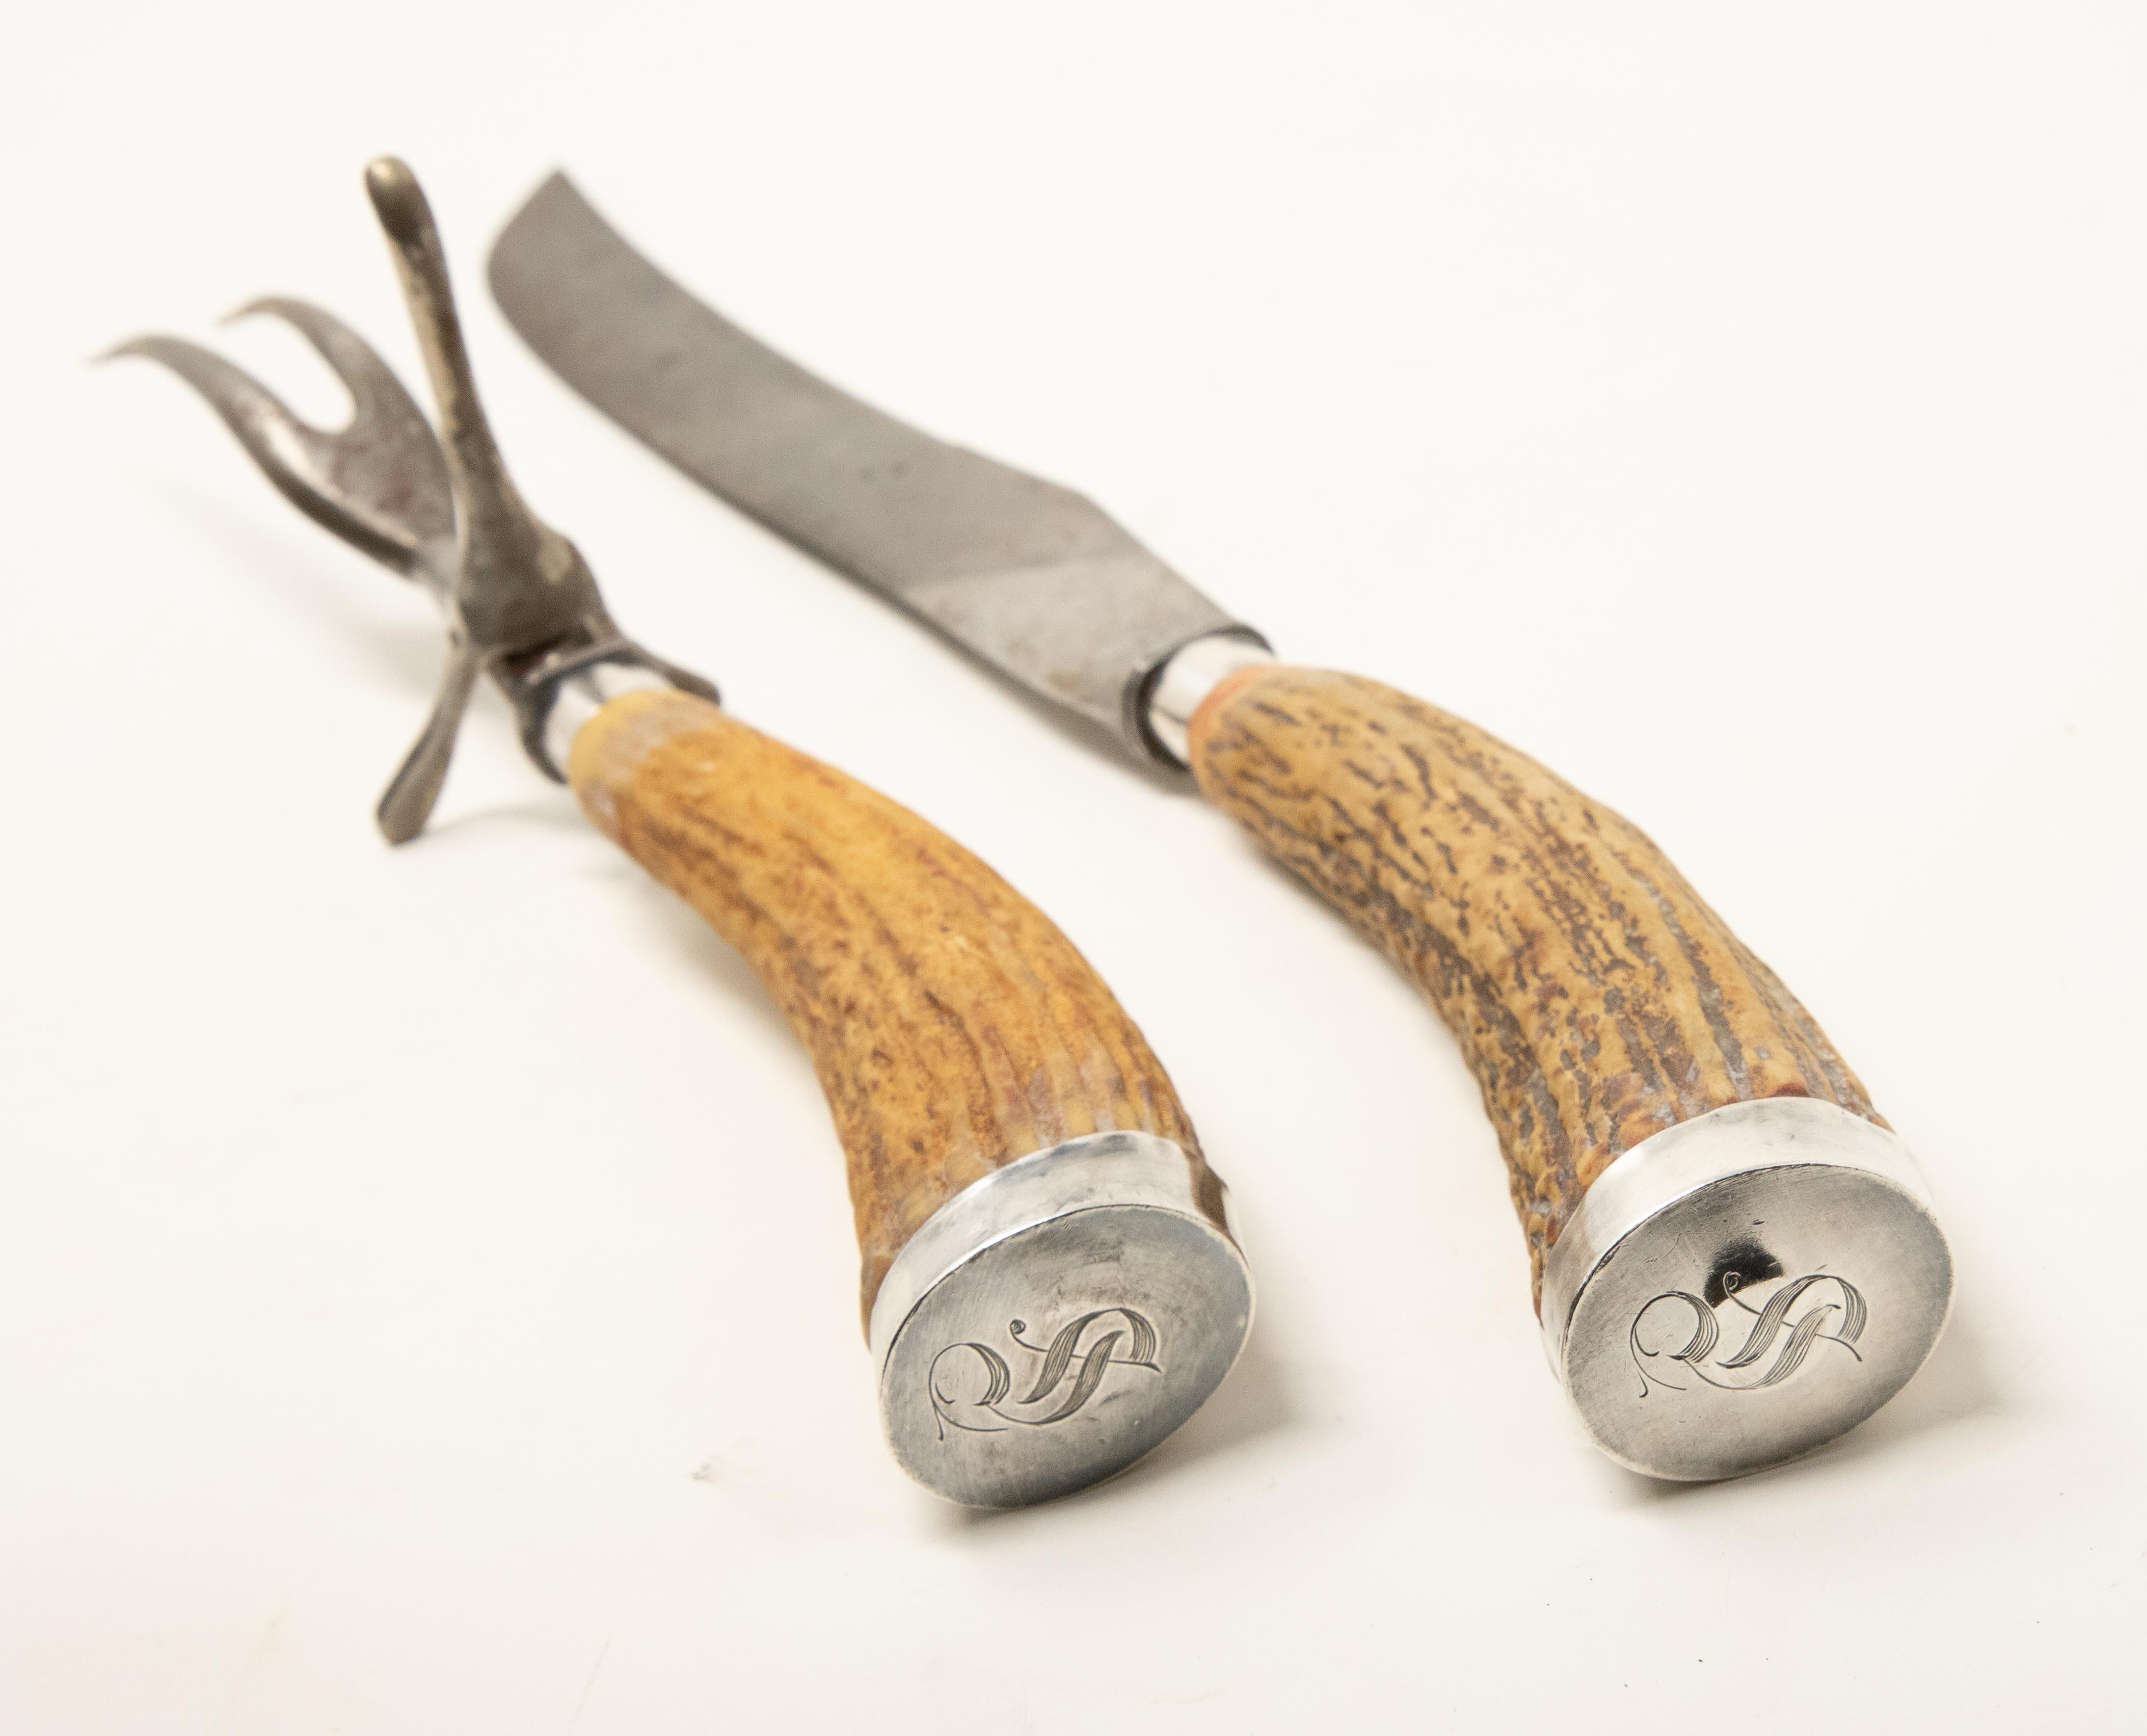 Offering this stunning pair of sterling silver and antler handle carving set. The ends of the antlers are covered in a sterling silver cap with the letter S engraved, and they are marked sterling.